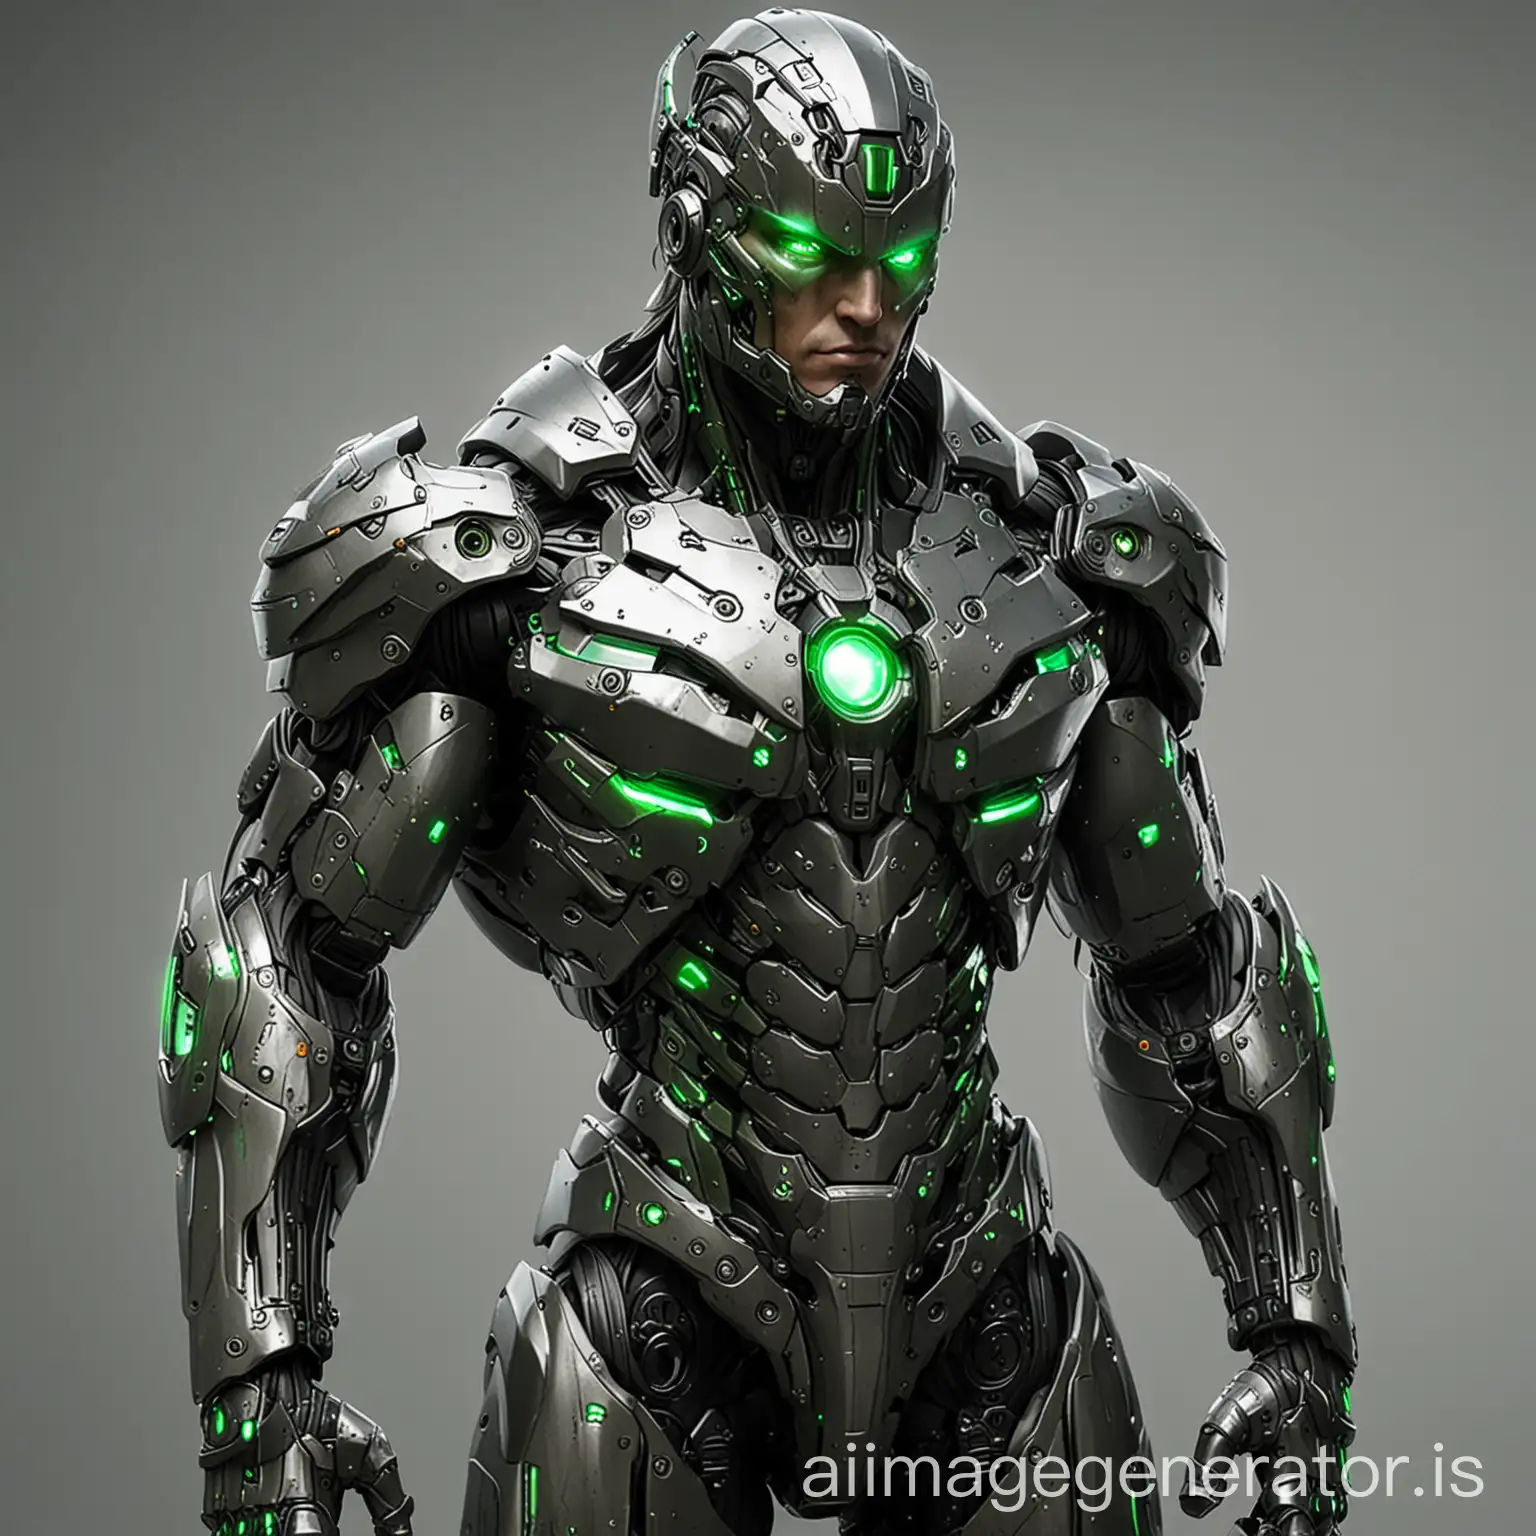 Tall-Muscular-HiTech-Armor-with-Glowing-Green-Eyes-and-Forearm-Bands